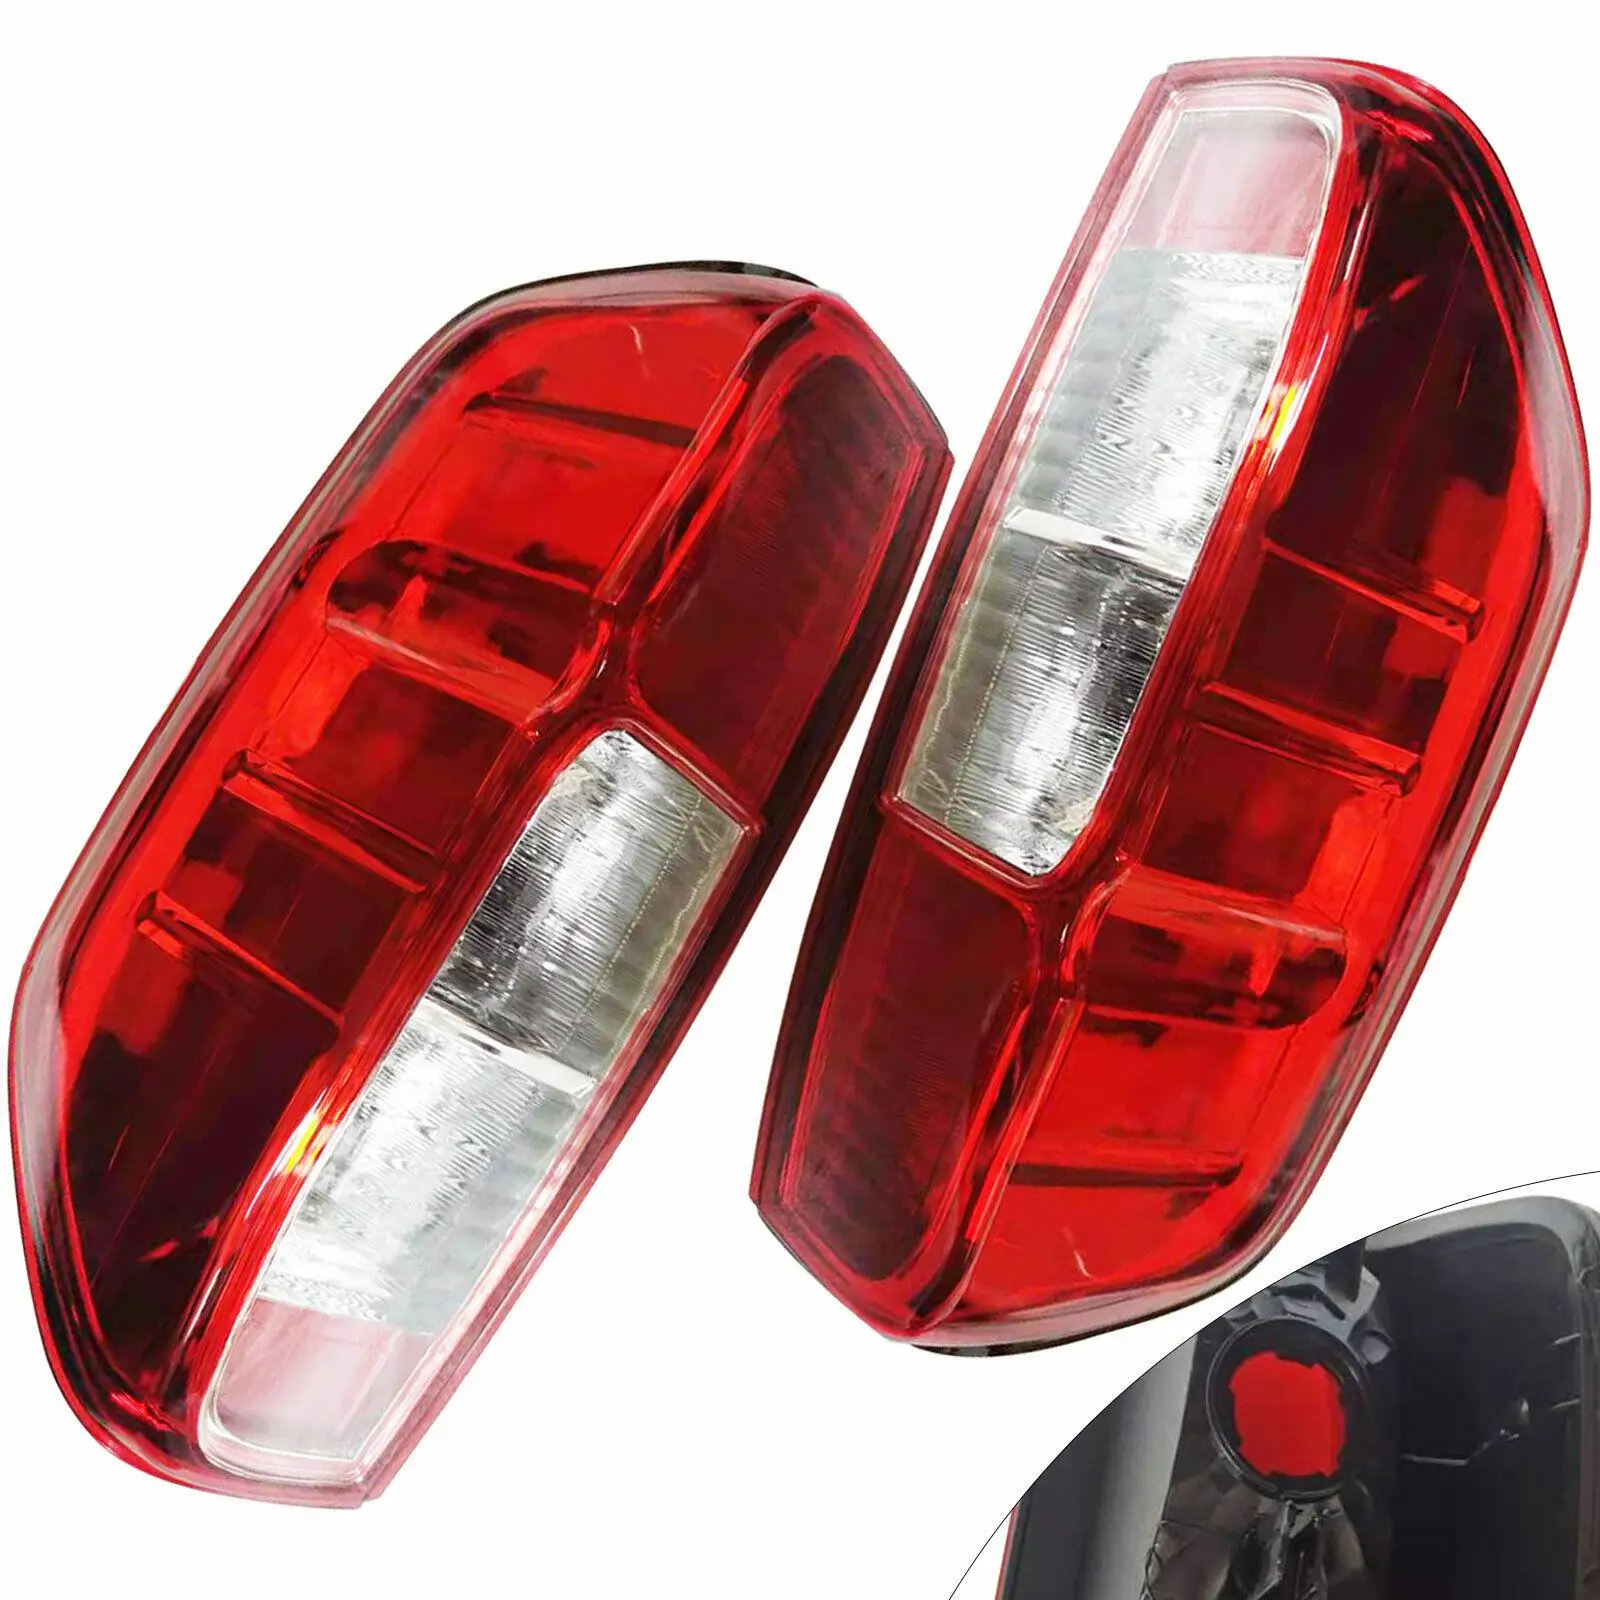 Pair Left & Right Rear Brake Lamps Tail Lights Taillamps for Nissan Frontier 2005-2015 Red Lens led tail lights fit 2006 2012 lexus is250 is350 isf smoked tinted lens lamp pair